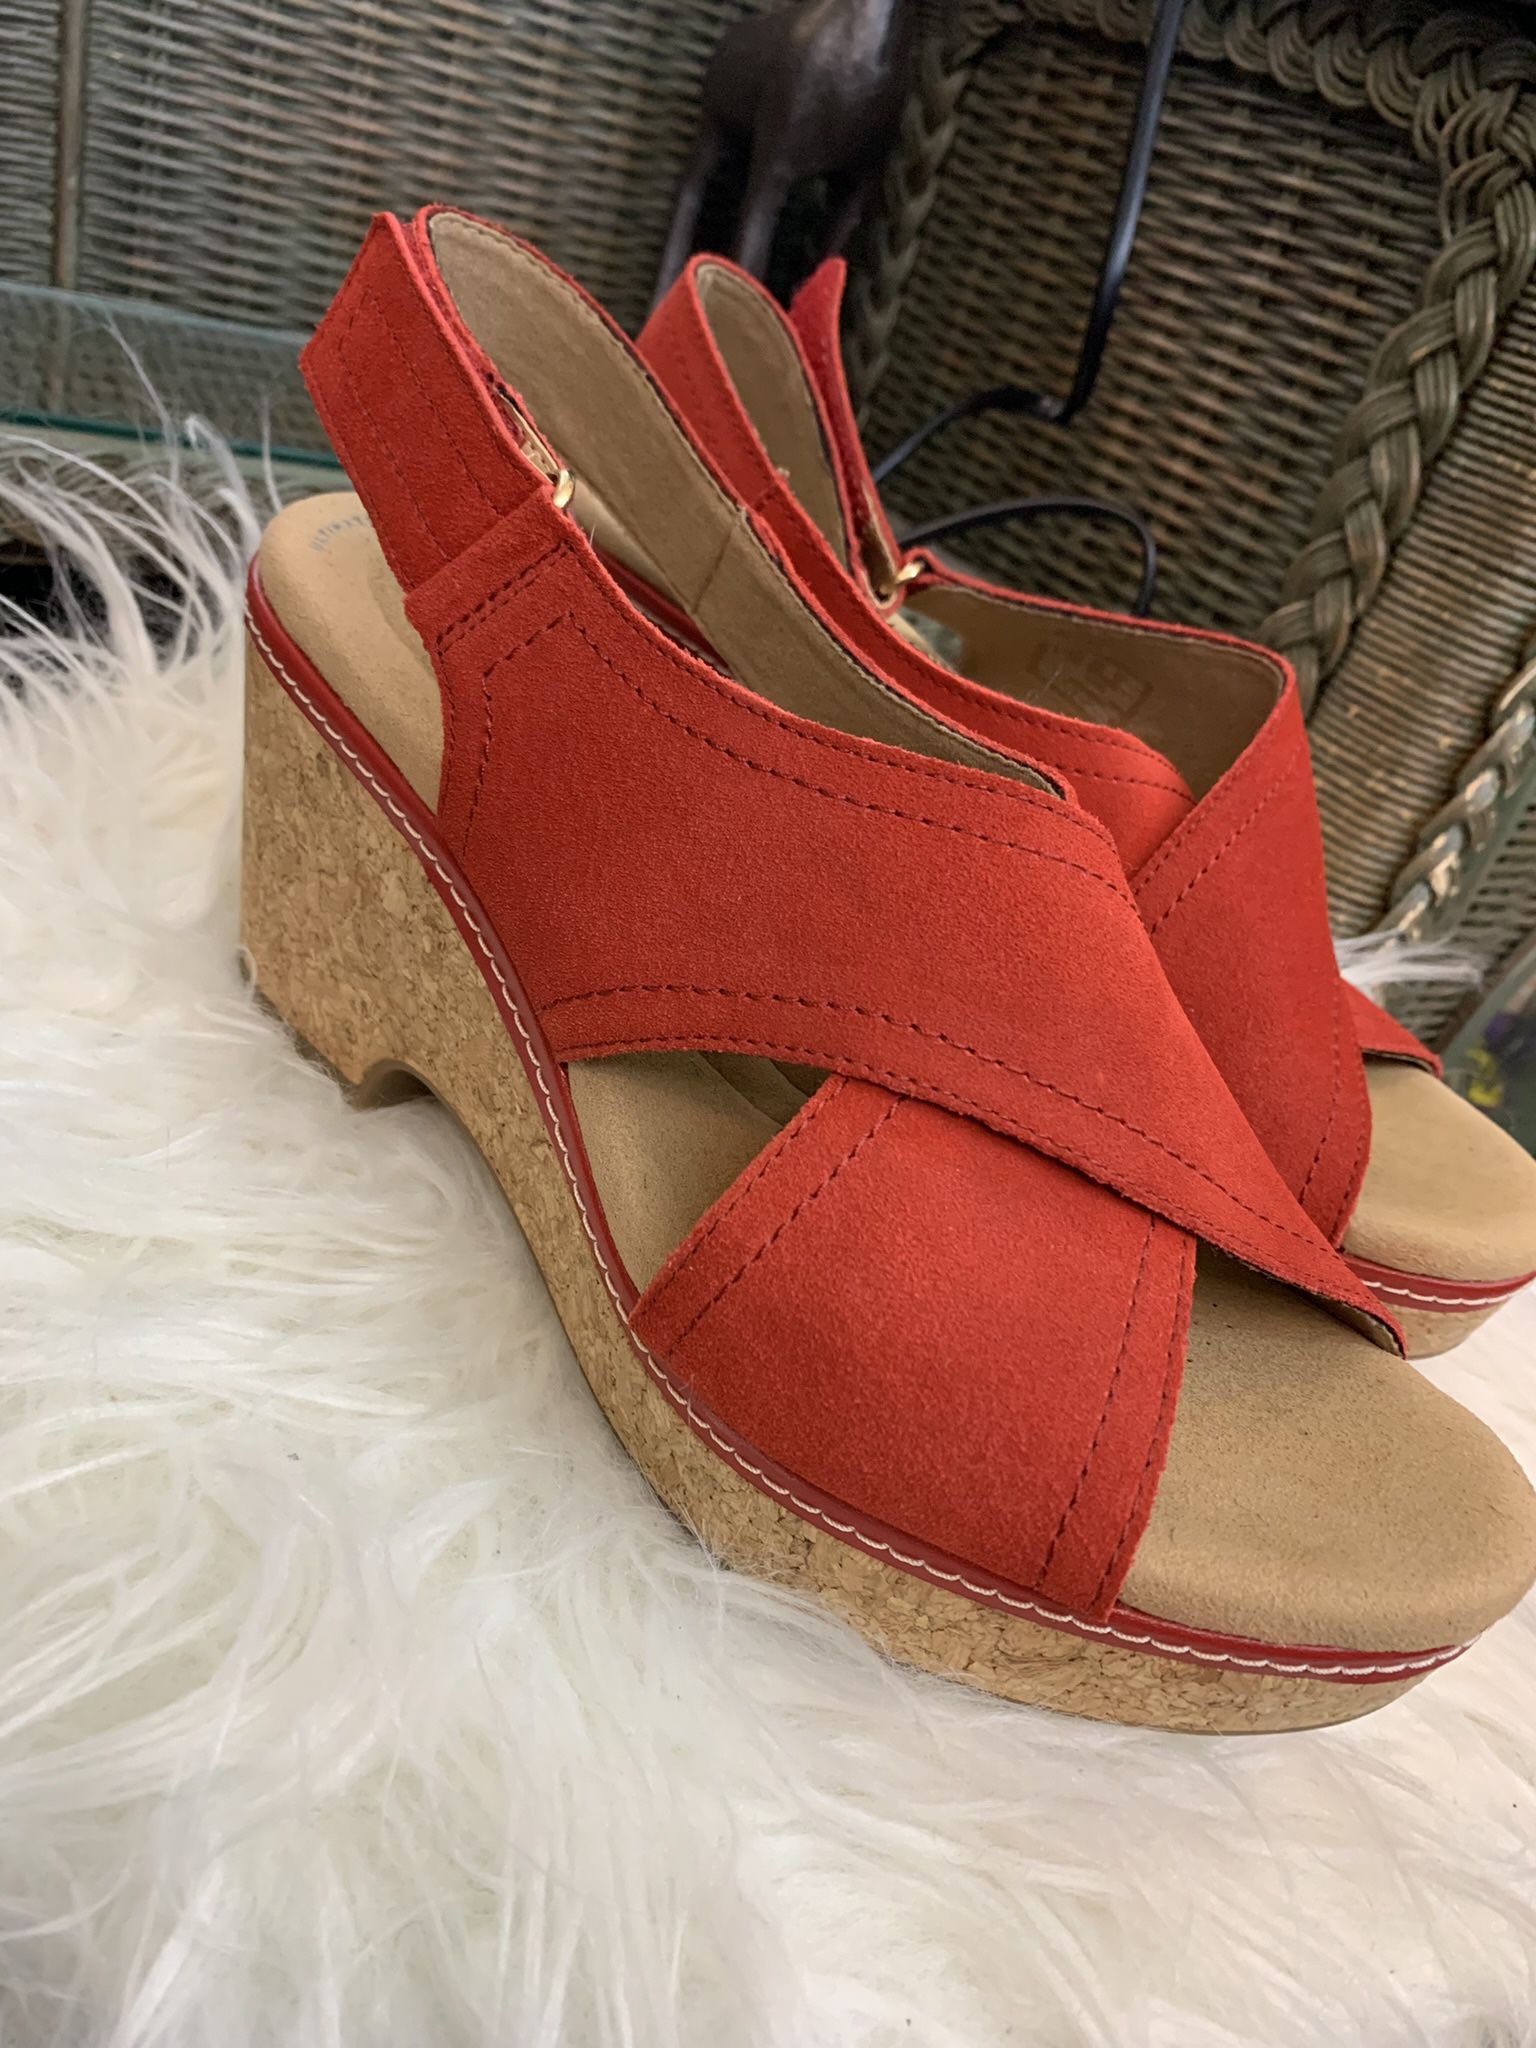 Clark’s Cork Wedge And Suede Sandal 8.5